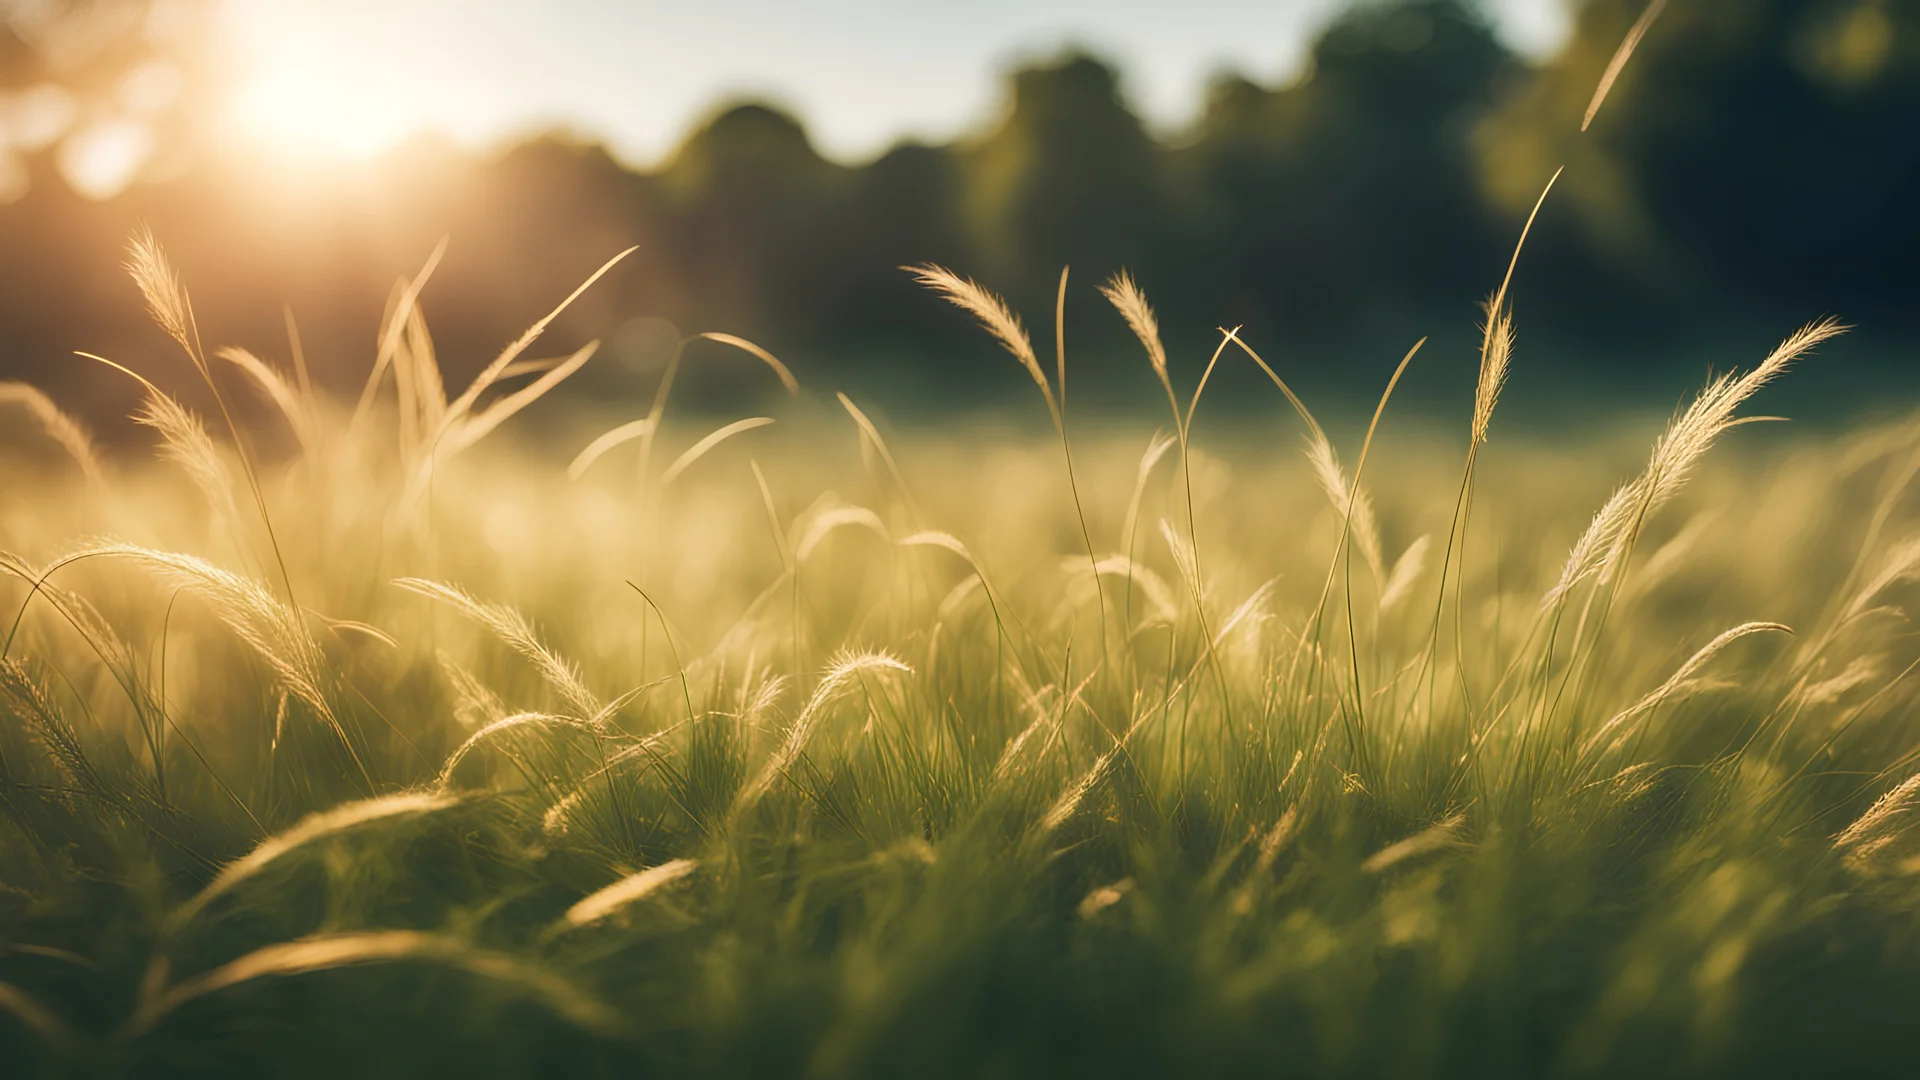 Image Type: HD Wallpaper Theme Description: A mesmerizing view of grass swaying gracefully in the wind Art style: Realistic, soft lighting, natural colors , Wide angle lens Shot: Wide shot Related information: High resolution (4K or 8K), Golden hour light, Detailed textures